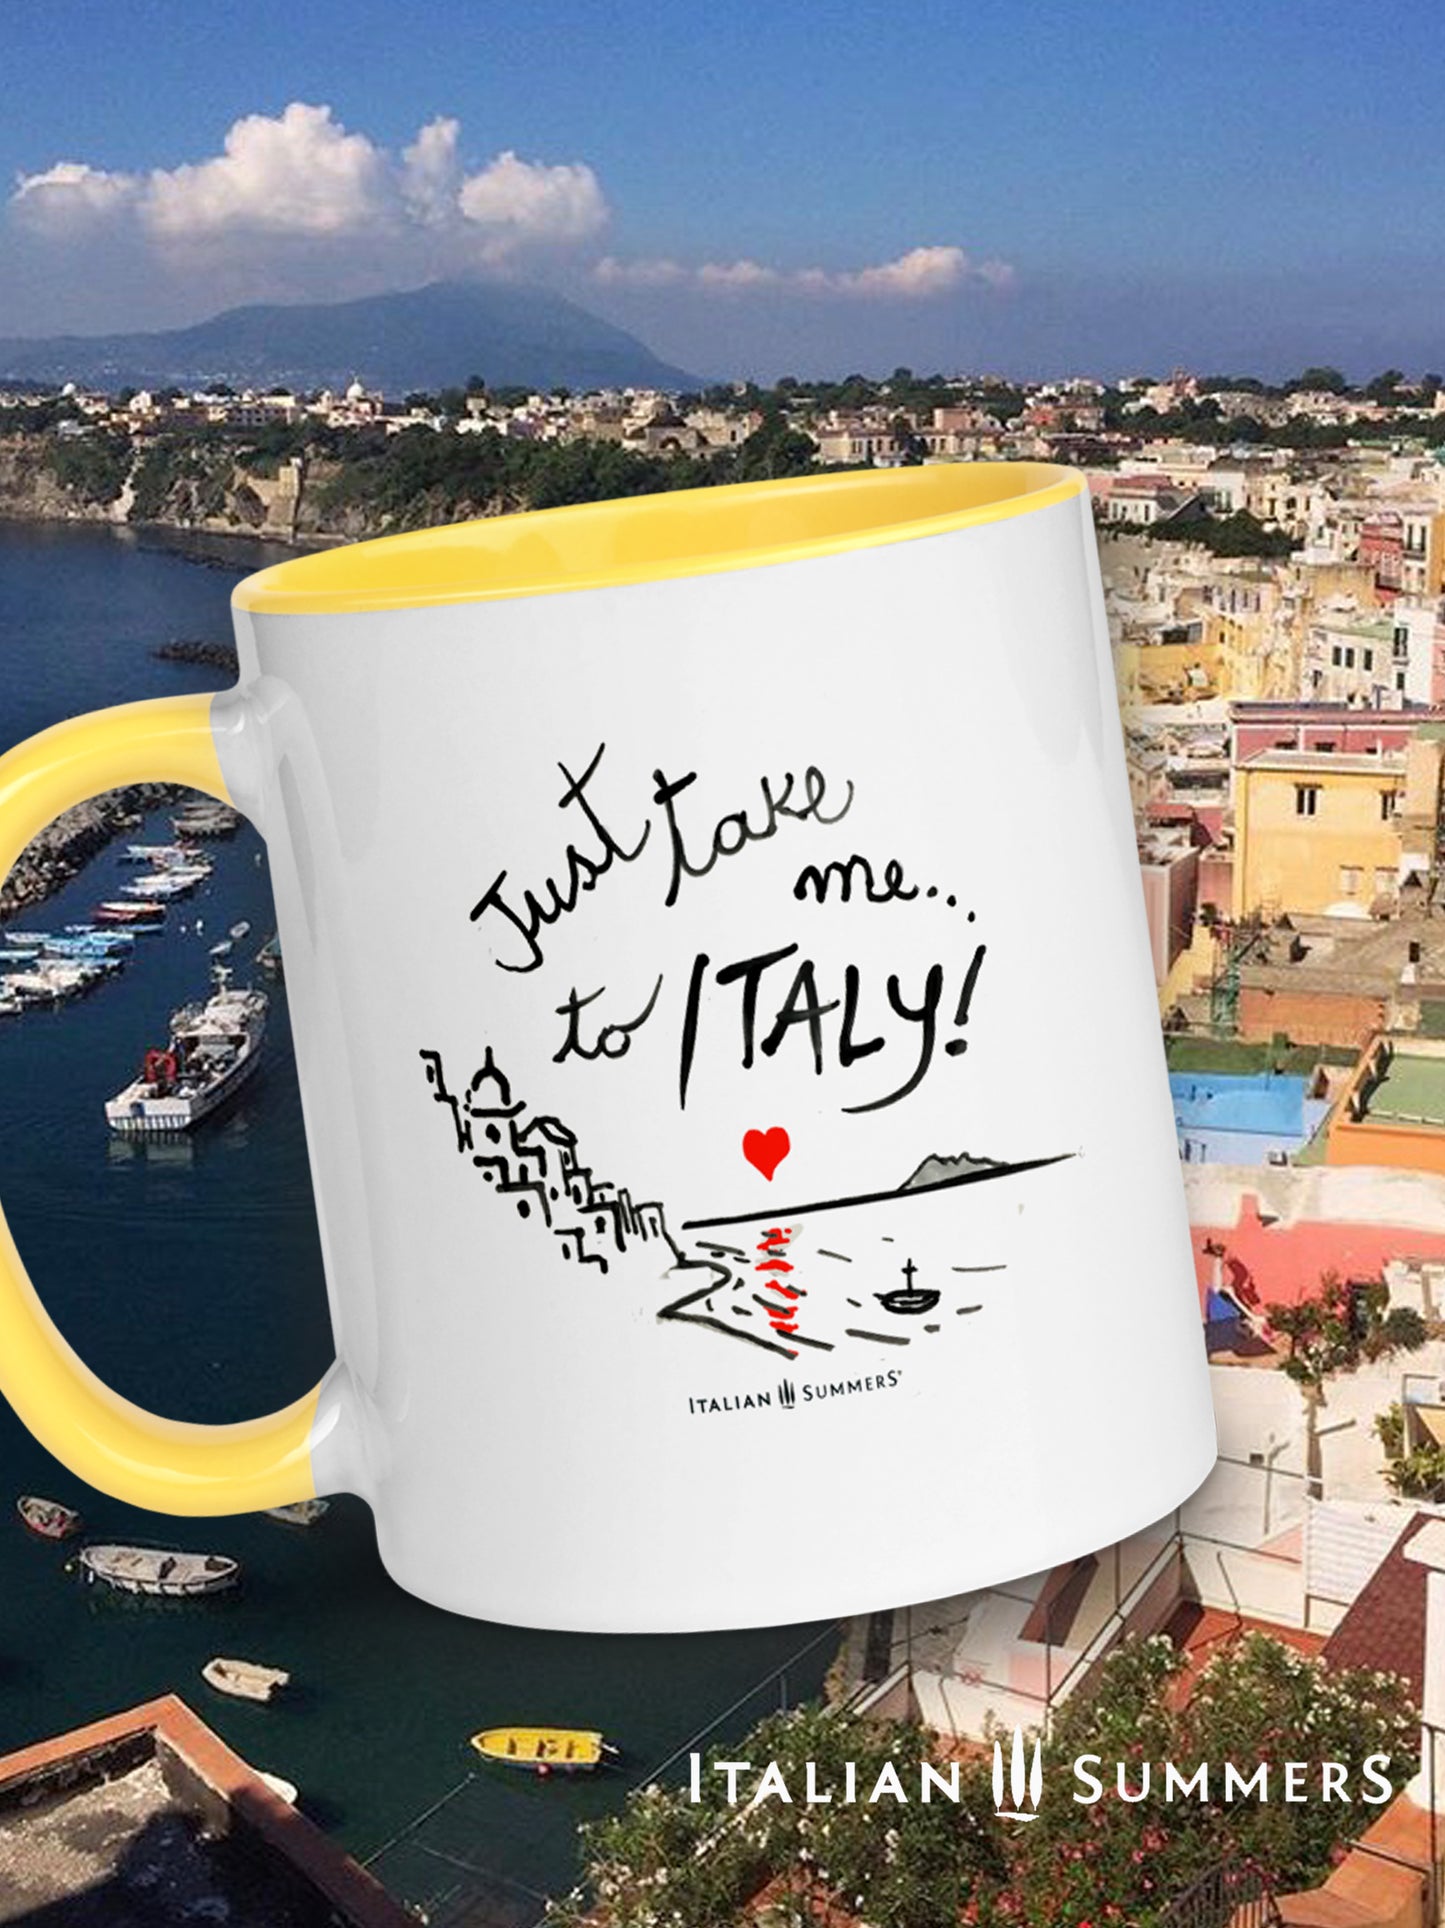 Italy inspired coffee mug decorared with the handwritten quote "Just take me to Italy" and a sketch of the Italian Riviera, aboce the sea the is a little red heart that reflects itself on the mediterranean sea. This mug comes with a blue, red, or yello inside and handle